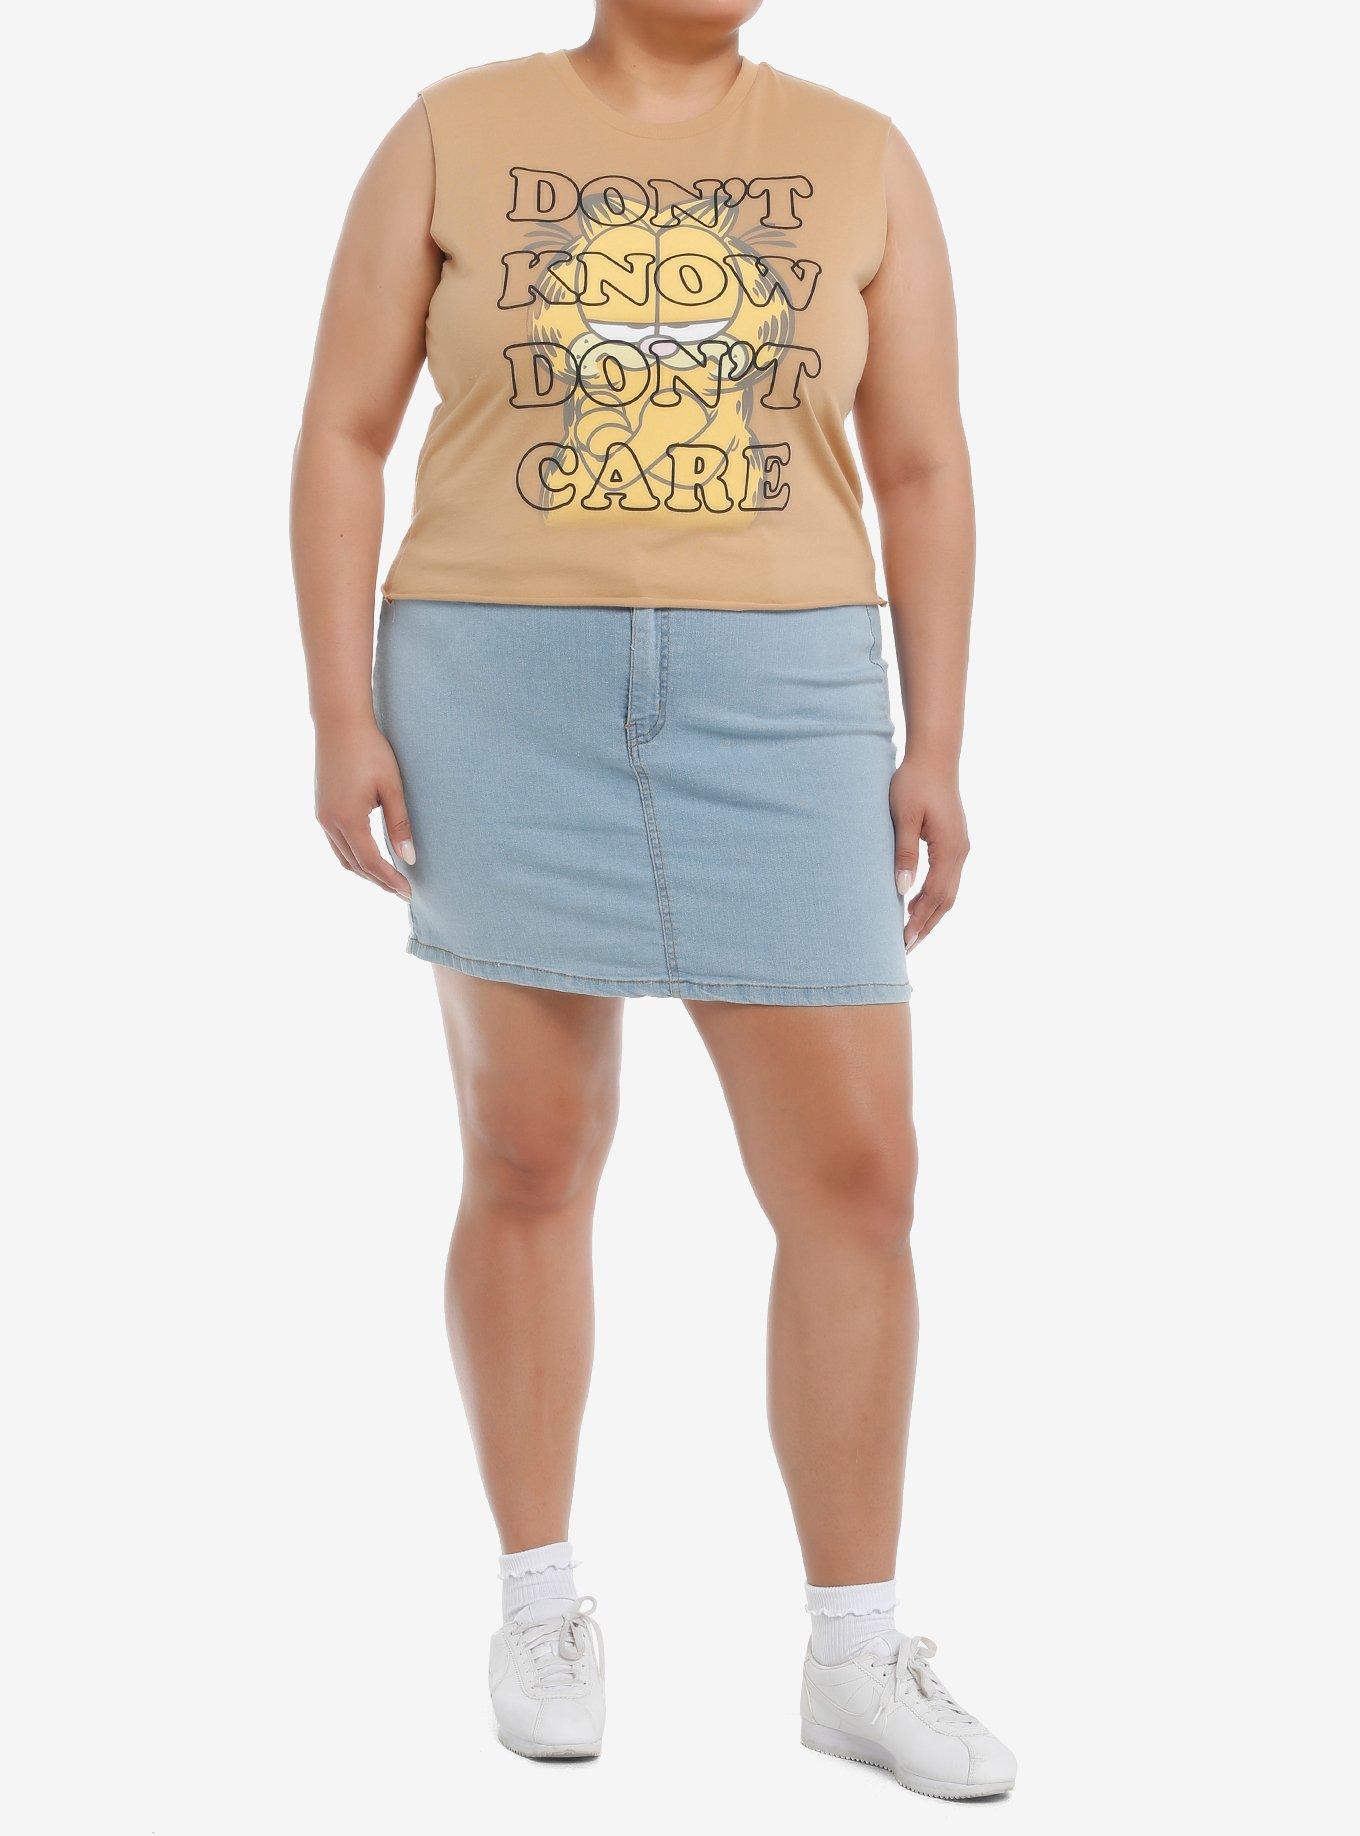 Garfield Don't Know Don't Care Girls Crop Muscle Tank Top Plus Size, MULTI, alternate